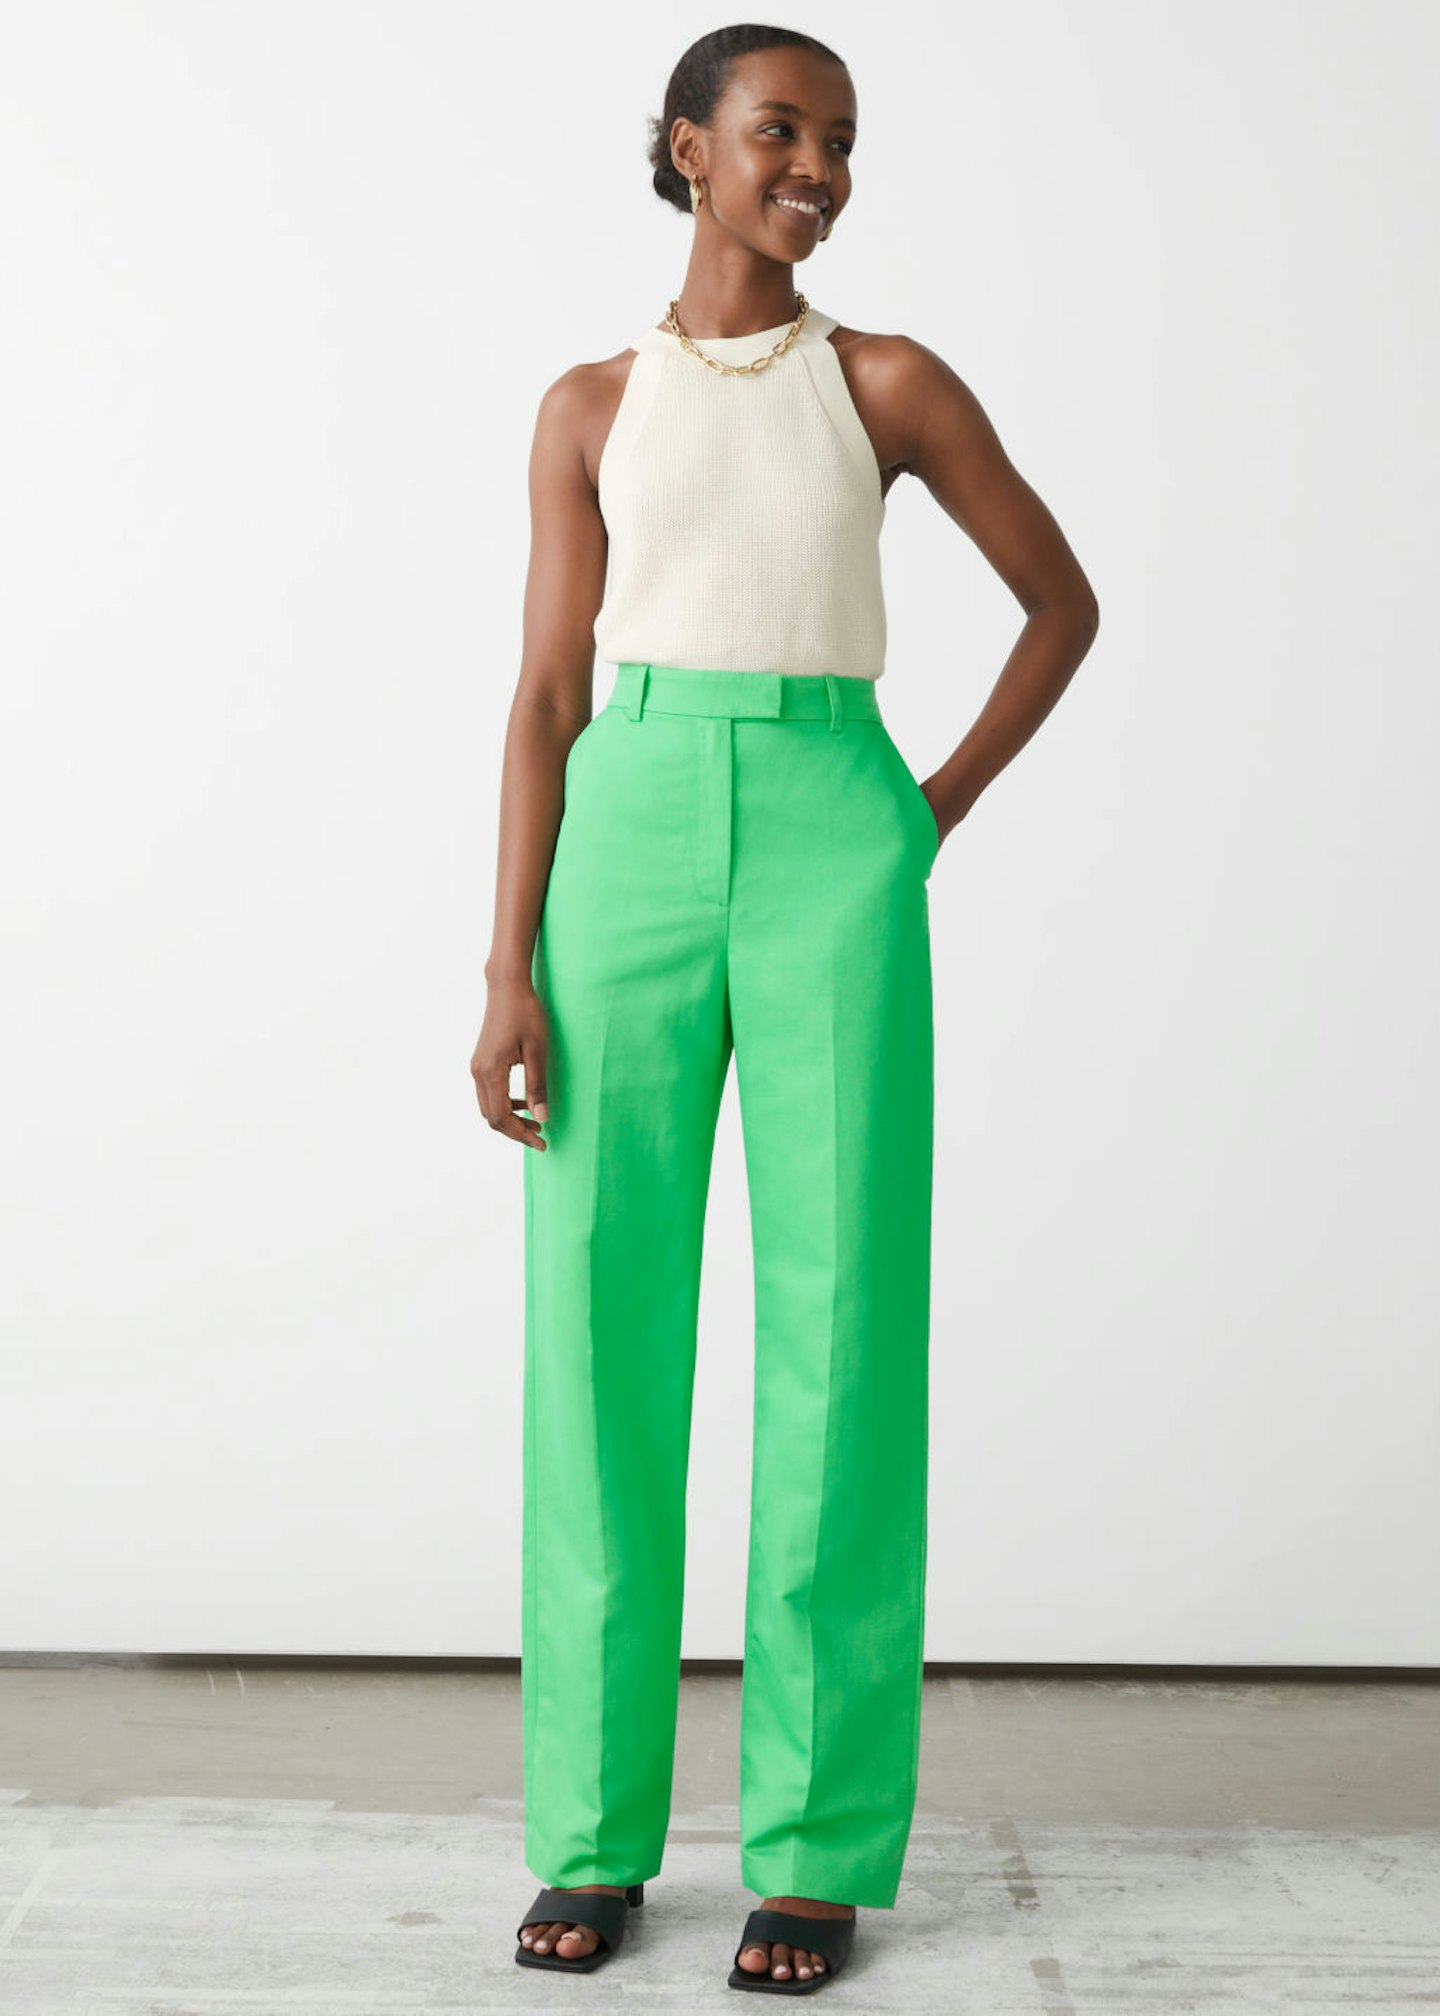 & Other Stories, Straight High Waist Trousers, £75